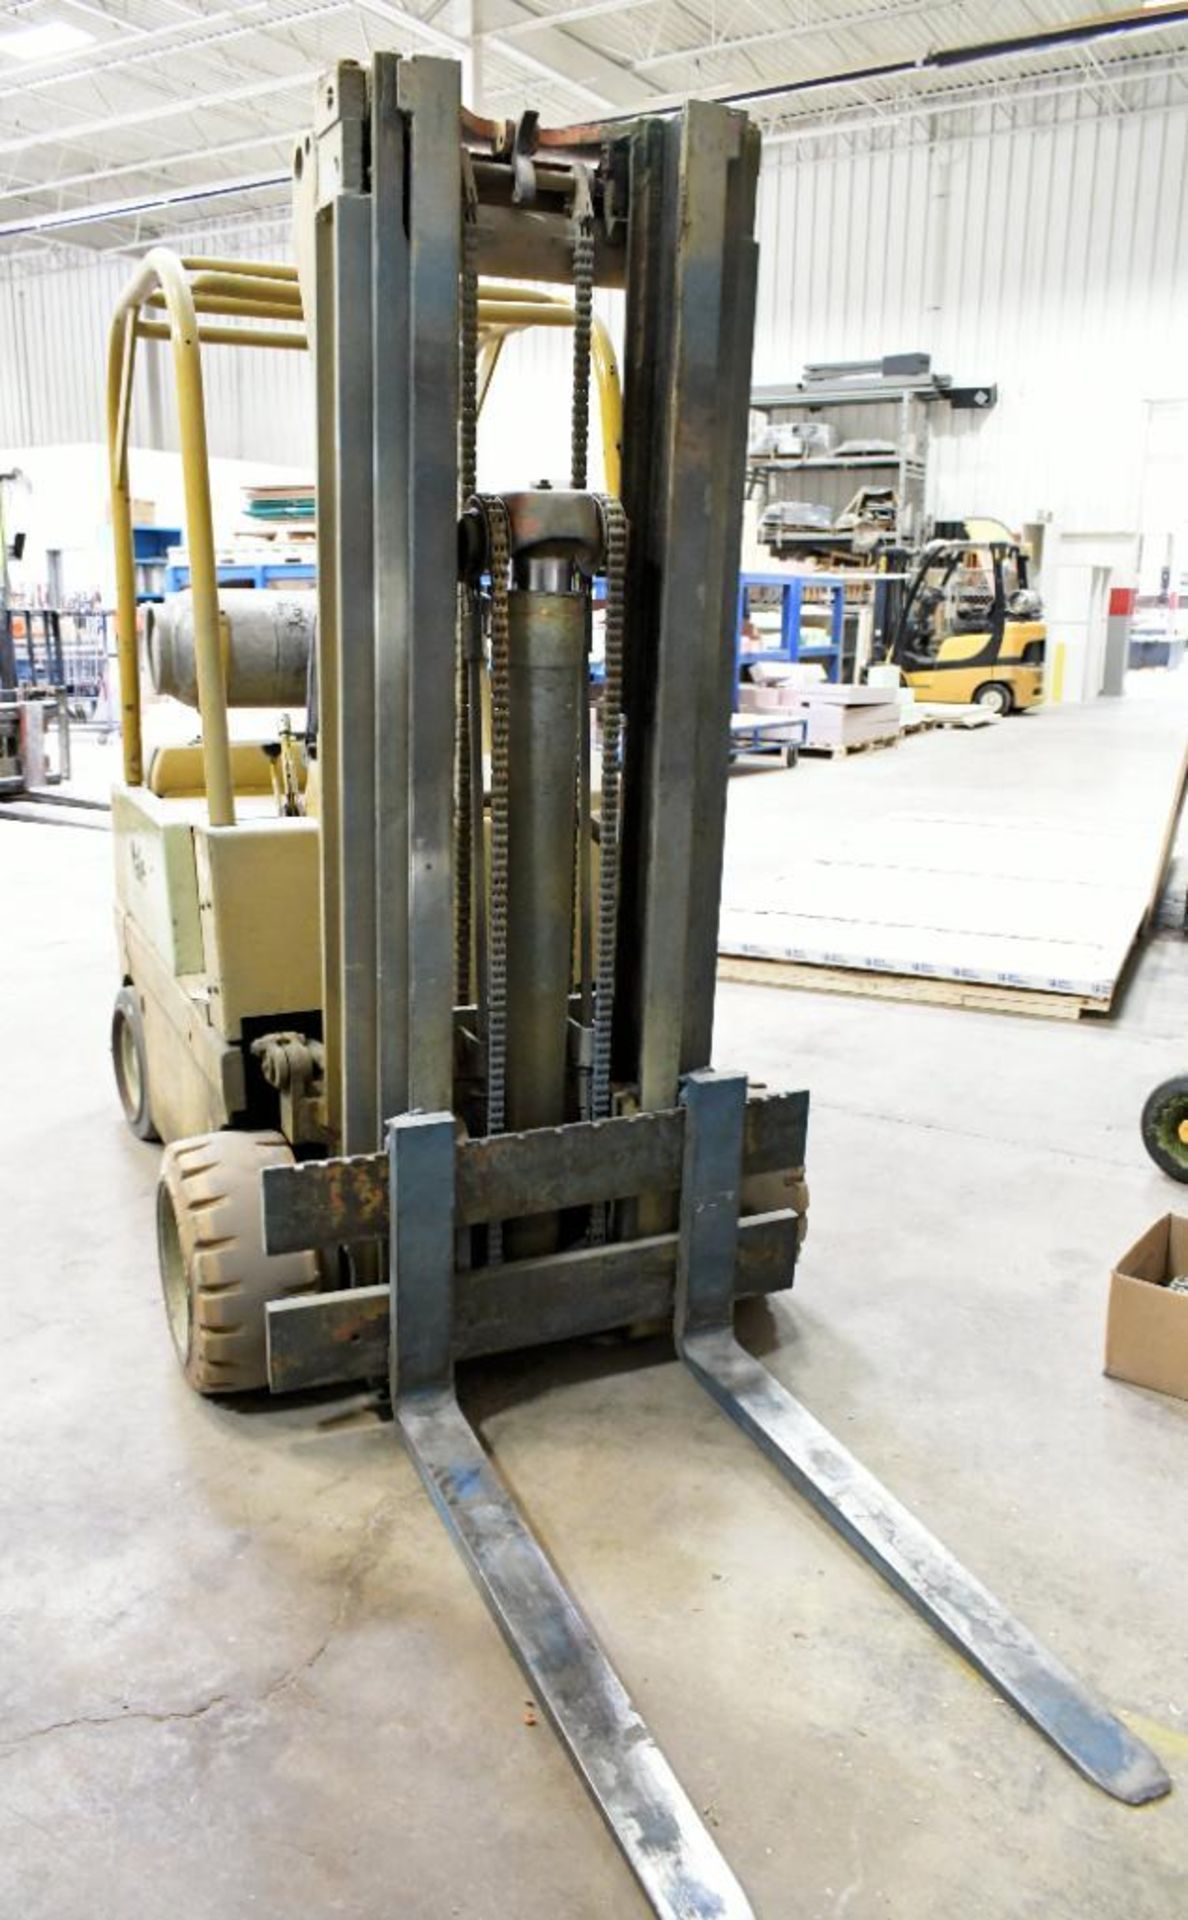 Yale Model G51C-040-NAT-077, Approximately 5,000-Lbs. x 188" Lift Capacity LP Gas Fork Lift Truck - Image 2 of 3